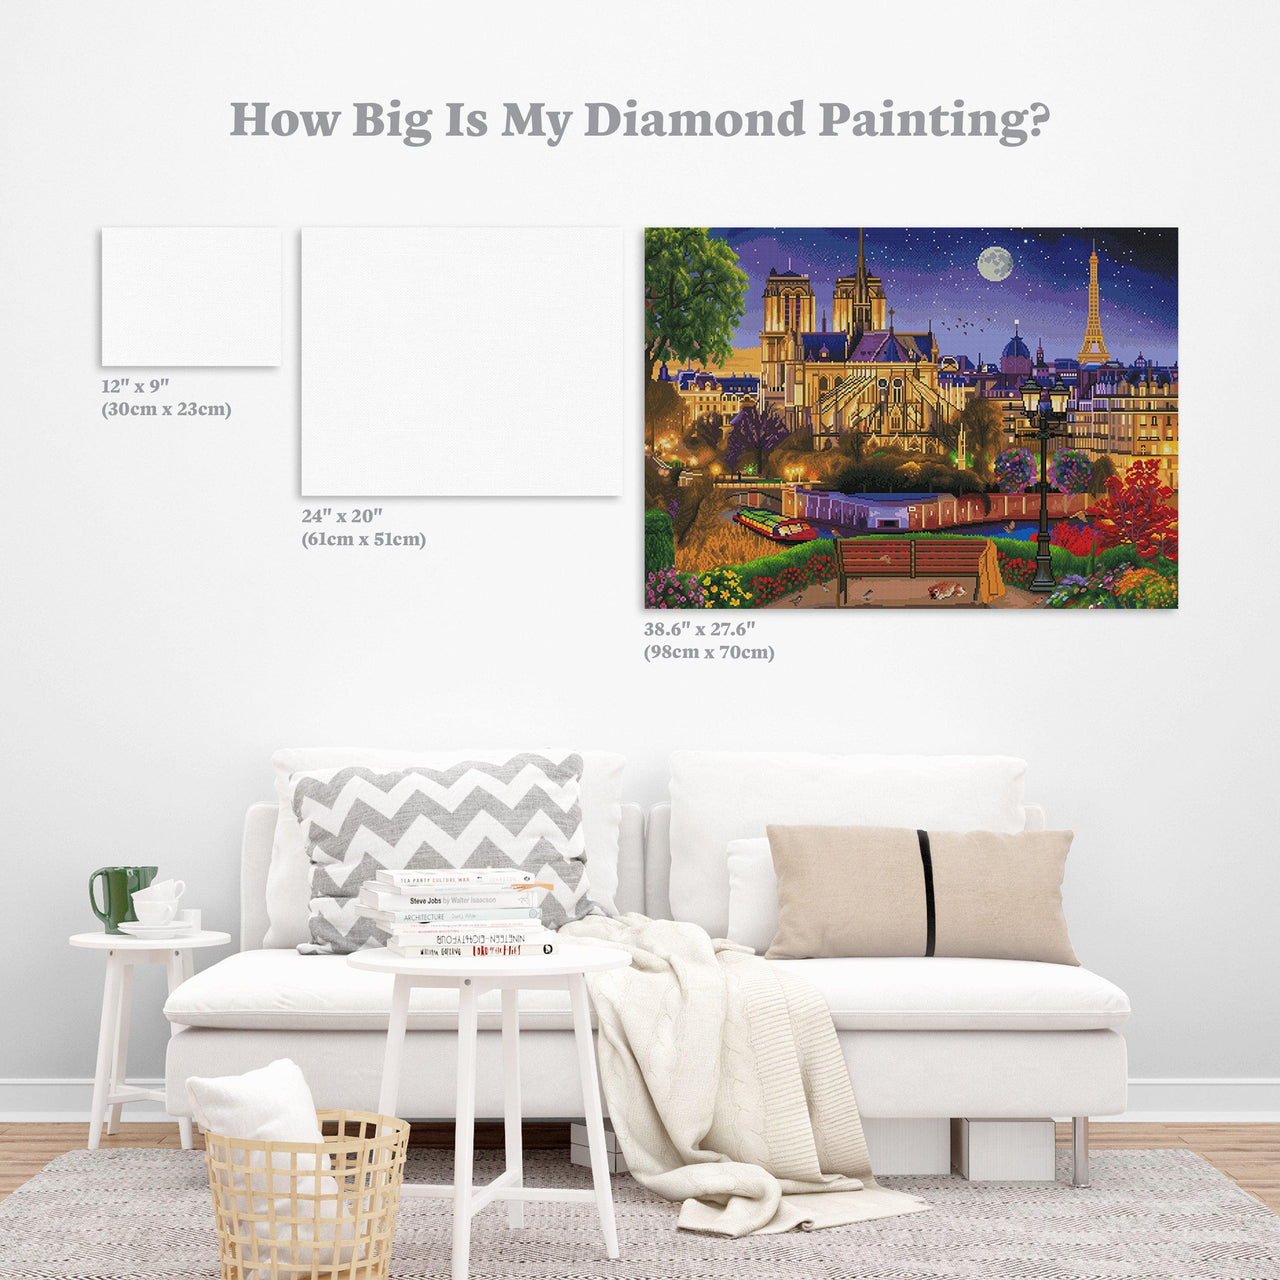 Diamond Painting Notre Dame Night 38.6" x 27.6″ (98cm x 70cm) / Square with 65 Colors including 4 ABs / 107,472